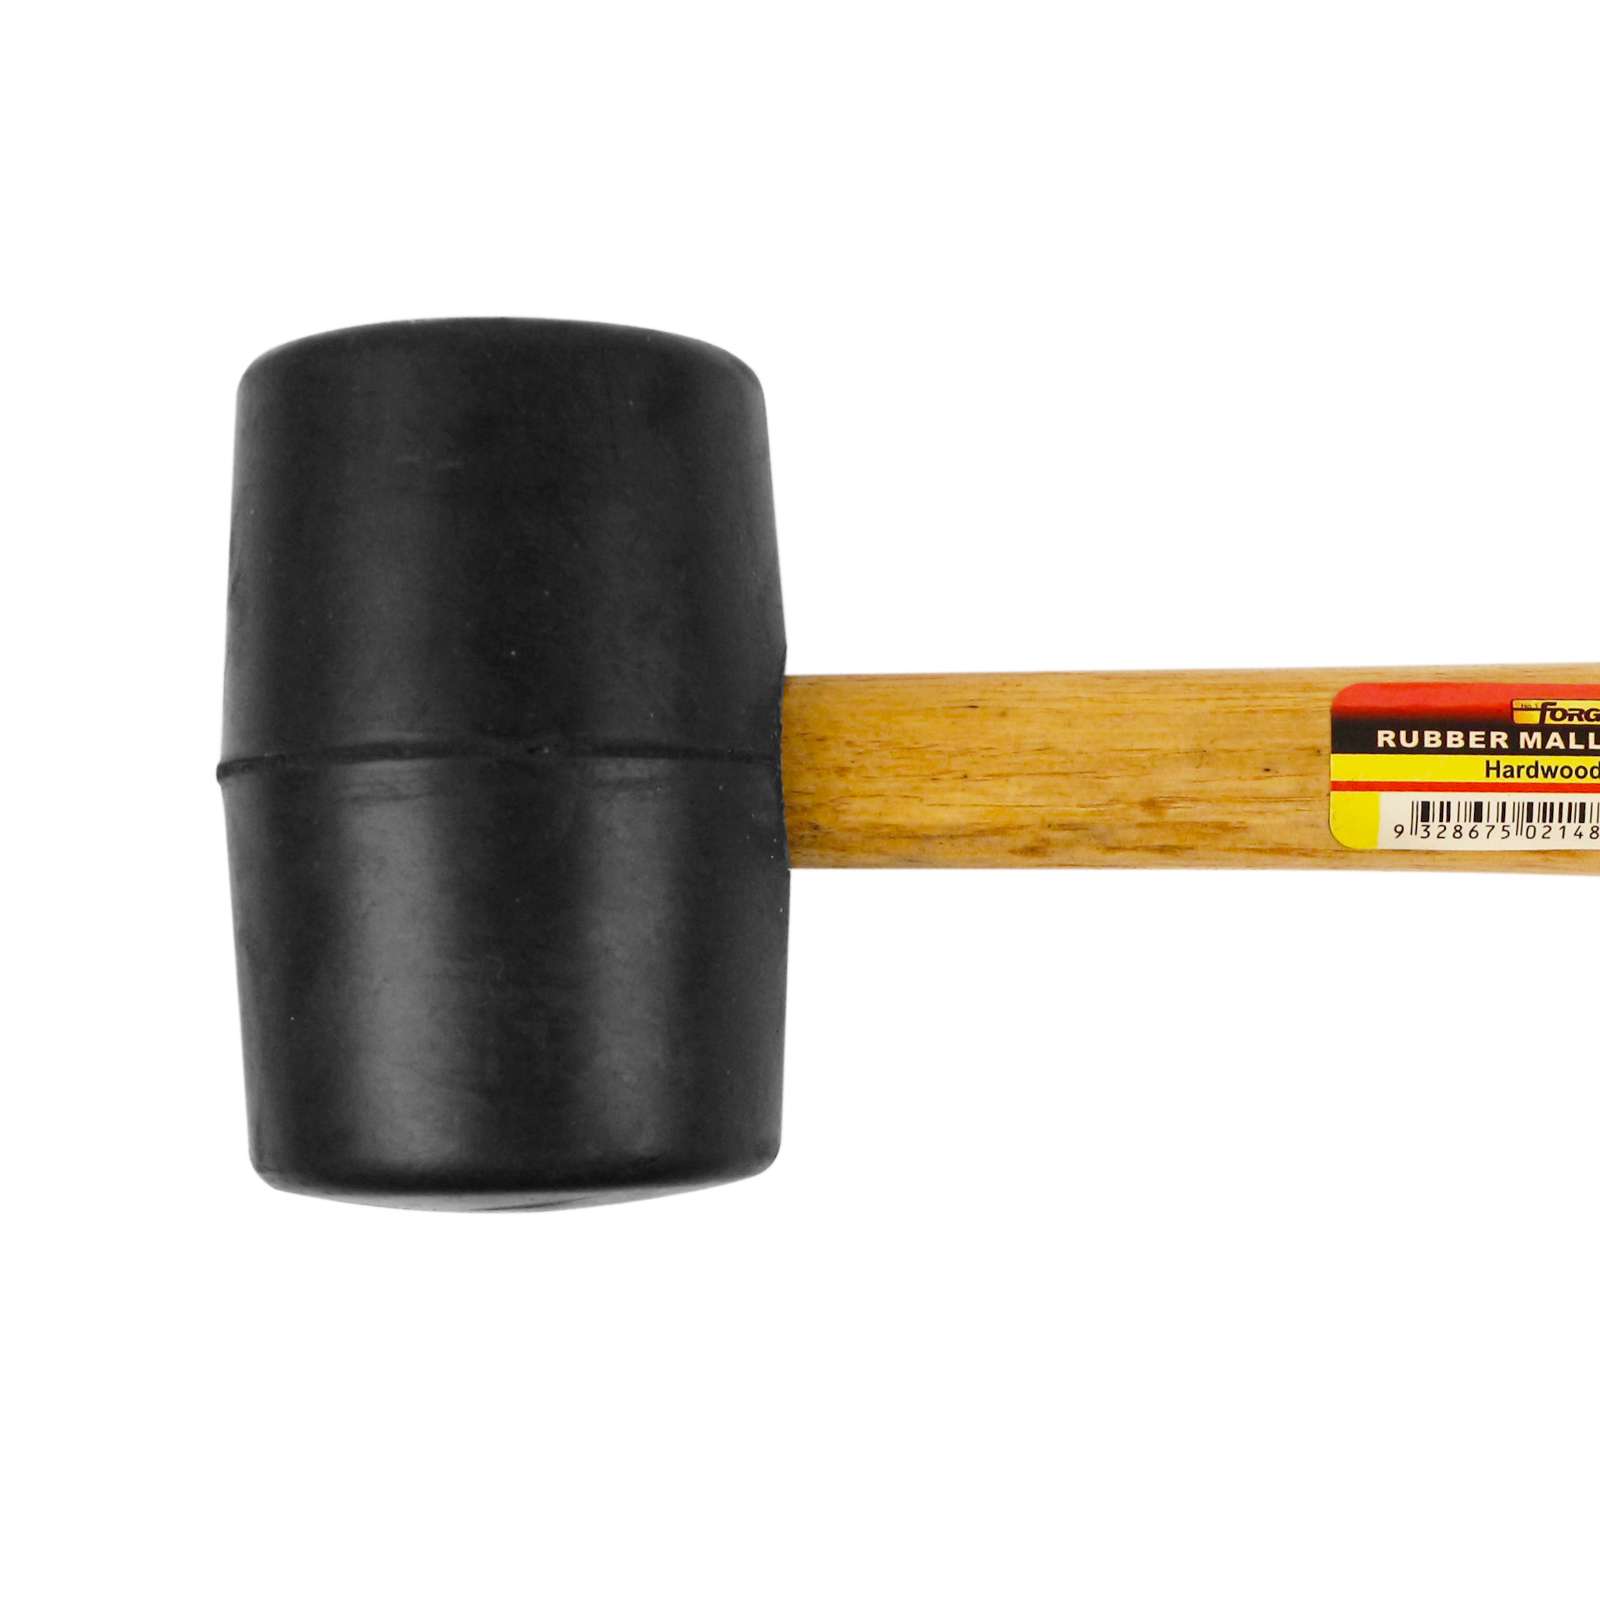 1 lb Solid Black Rubber Head Mallet with Wooden Handle - 2